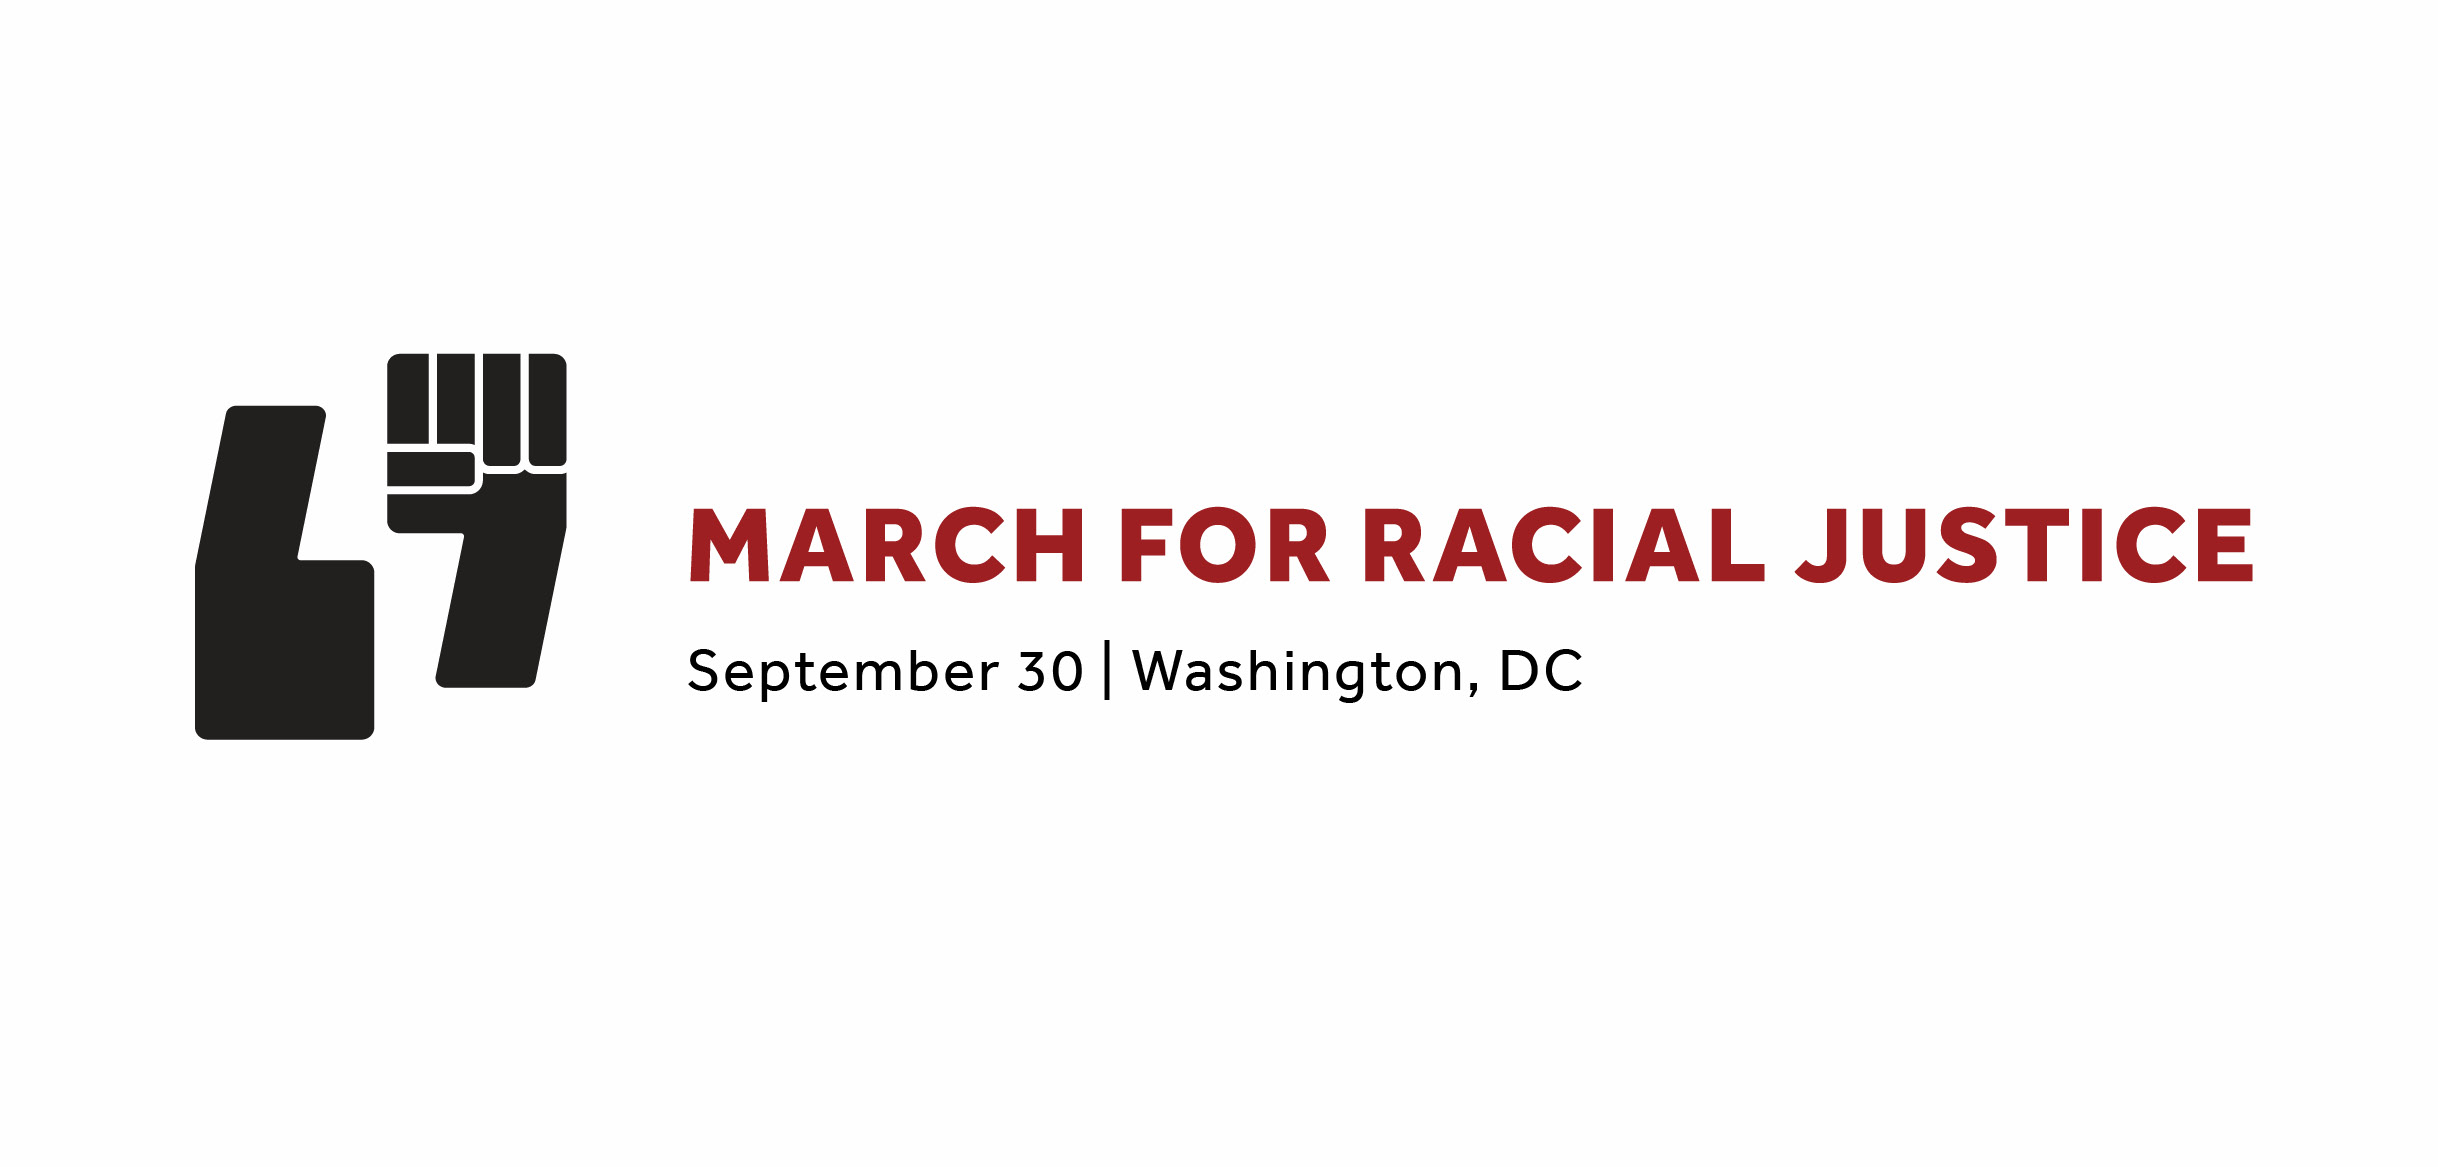 March for Racial Justice Logo consists of a black quote mark and a black fist having a 'conversation'; a lightning bolt is created by their negative space. The word is typeset in a geometric san-serif typeface and colored red.